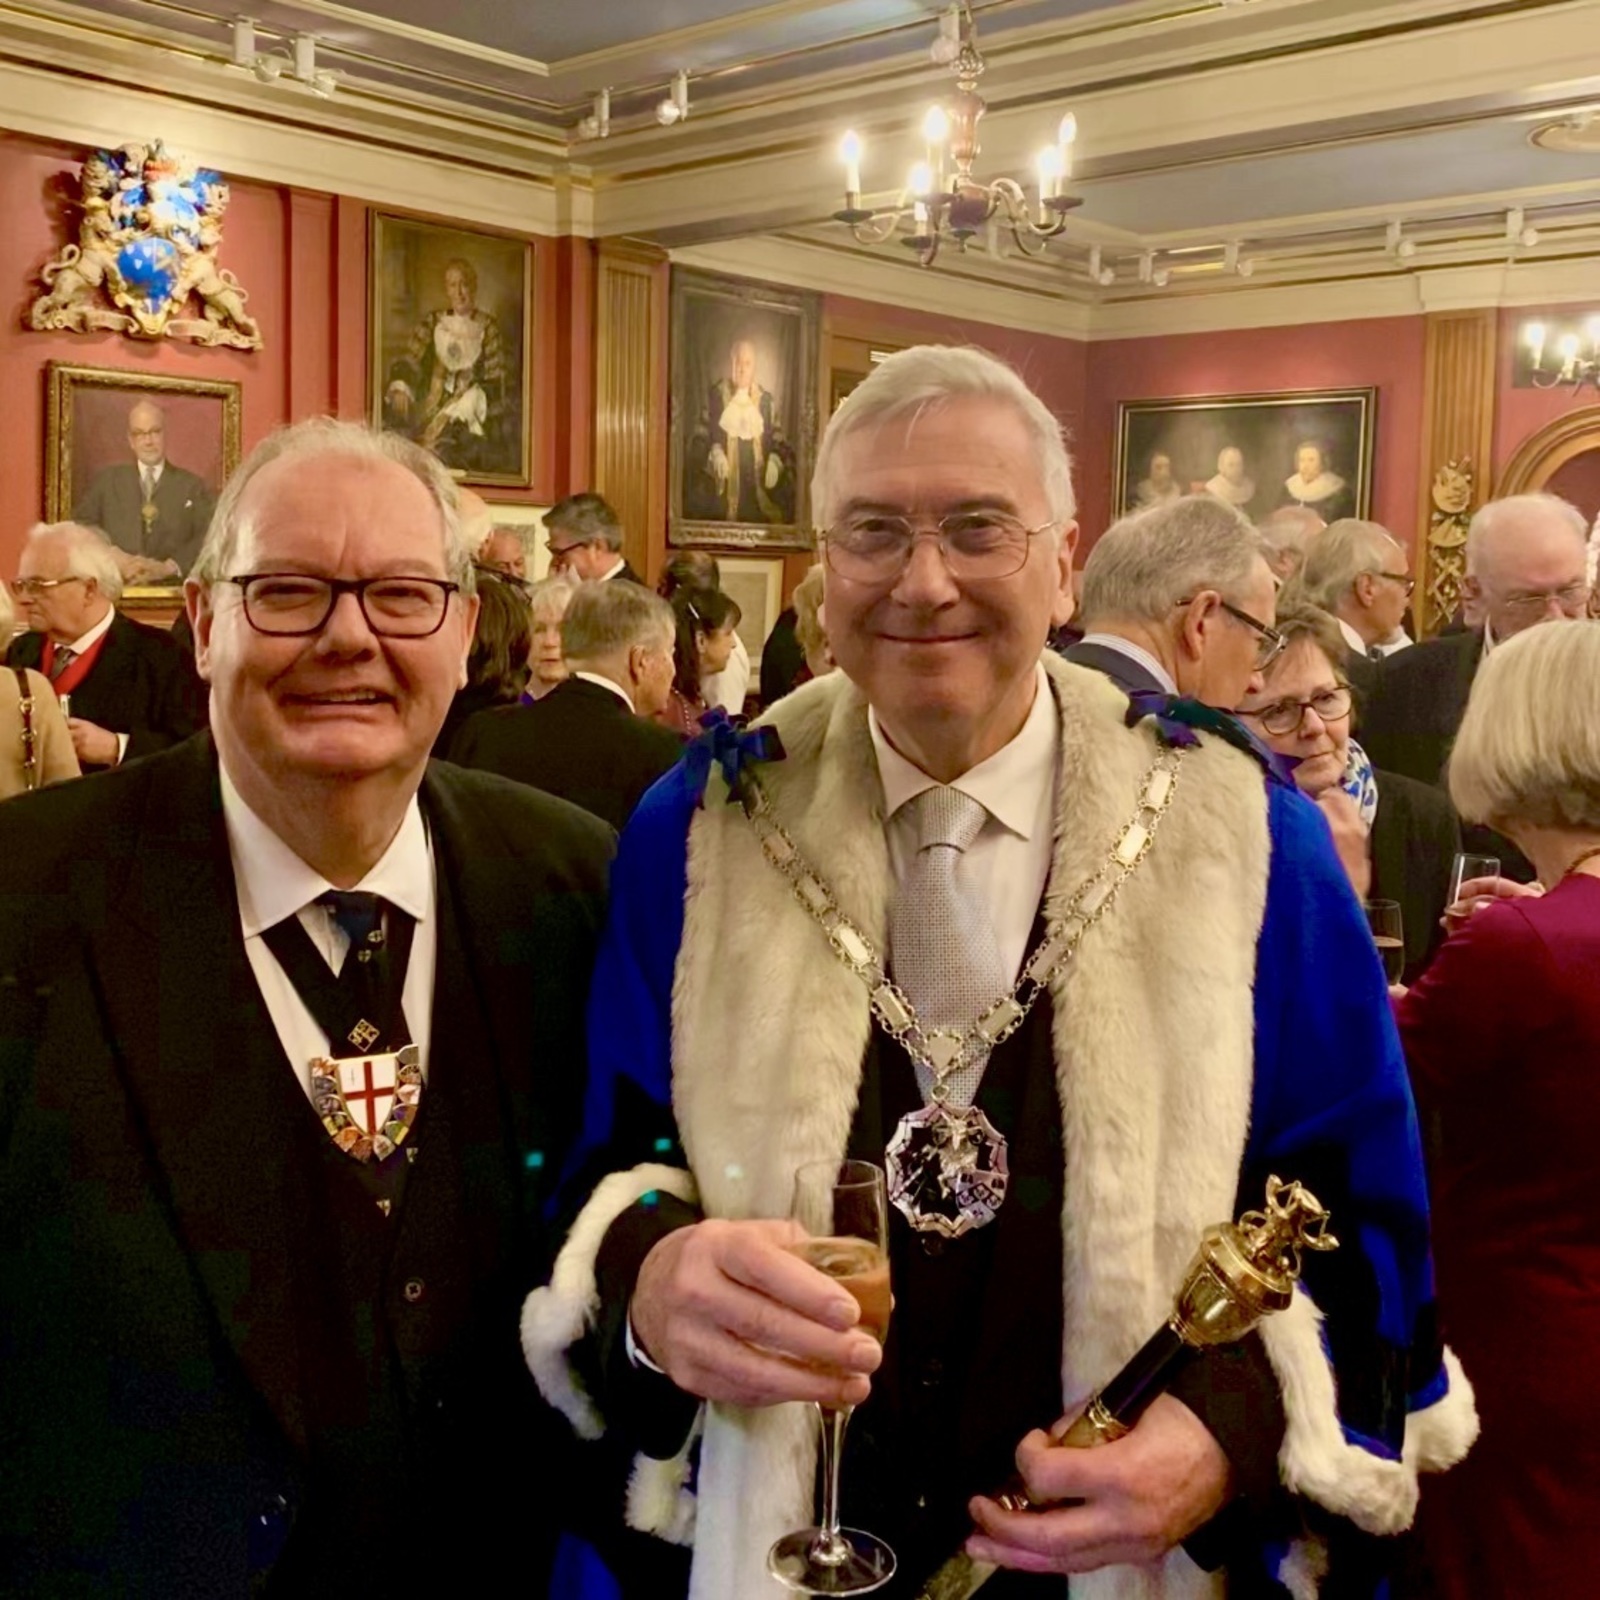 Privileged to attend the Candlemas Installation of The Horners’ new Master Michael Birrell at the beautiful Painters’ Hall